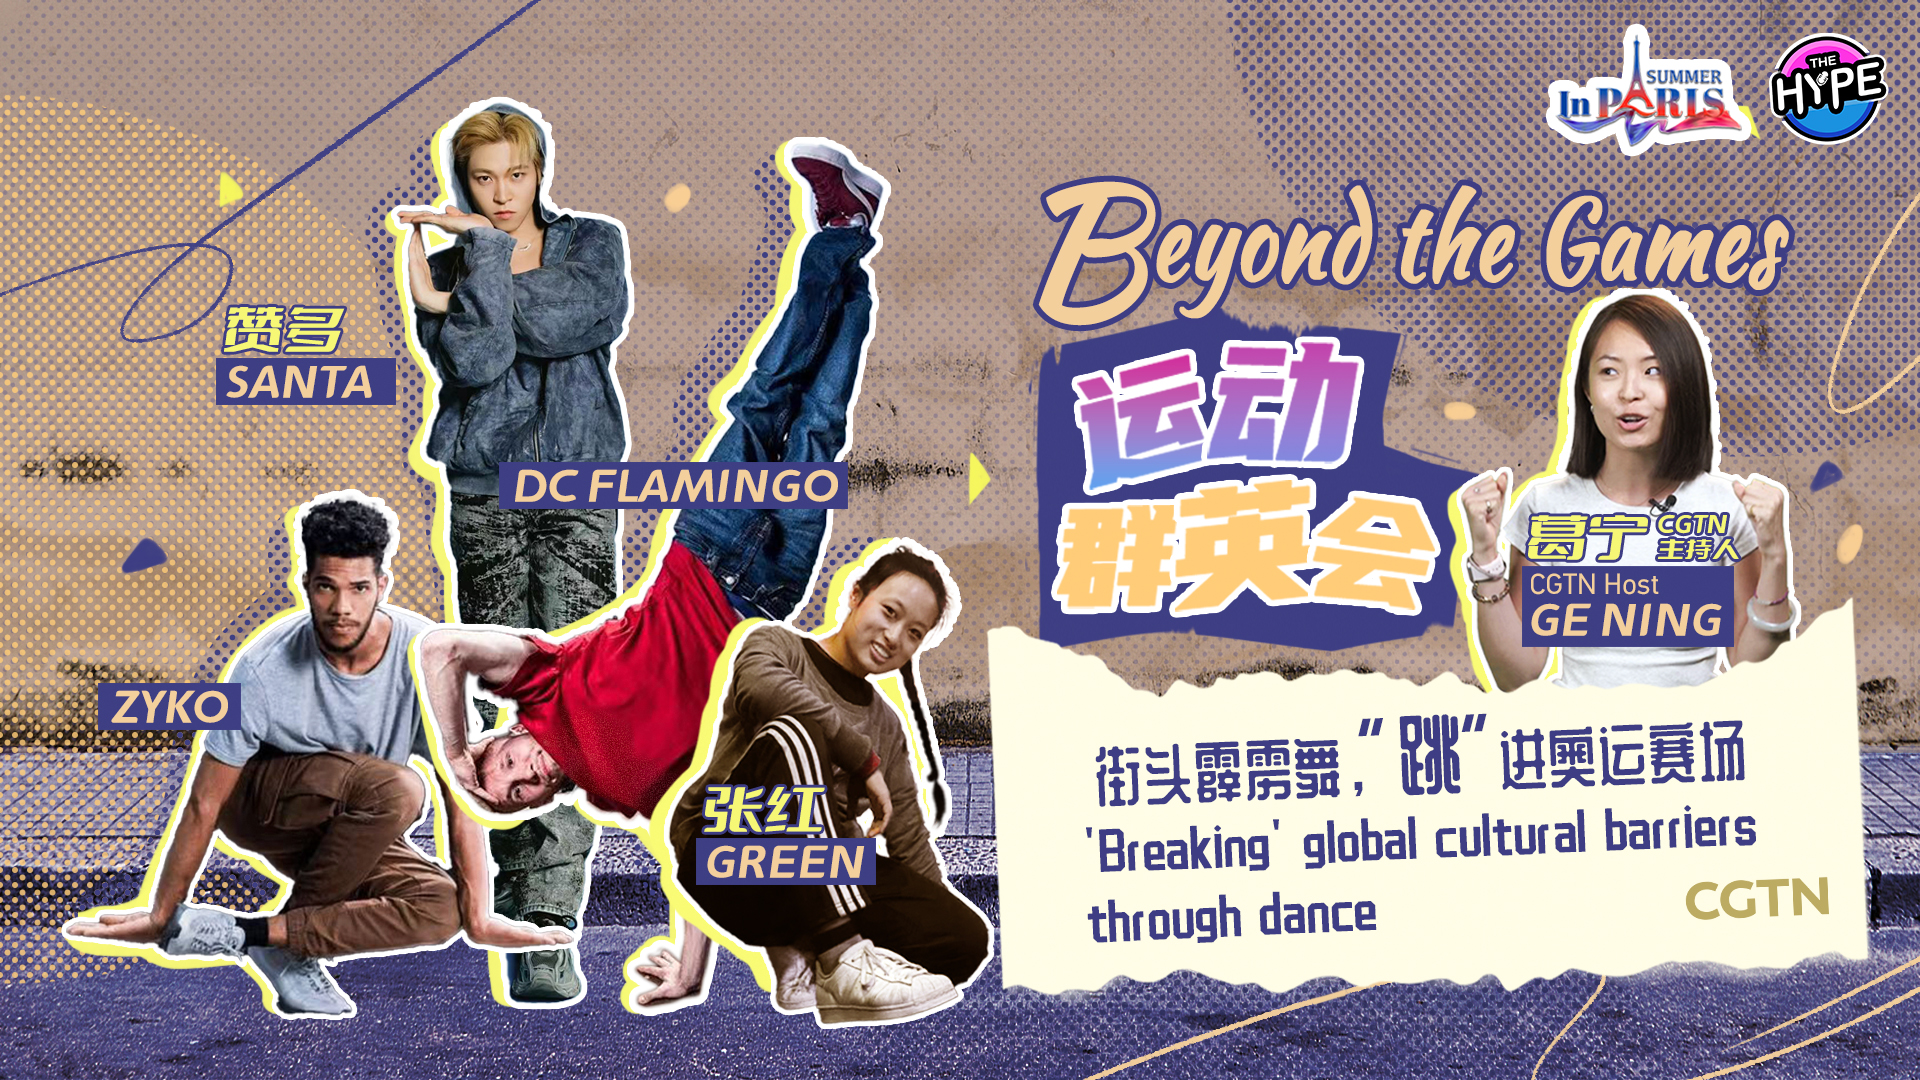 Watch: Beyond the Games – 'Breaking' global cultural barriers through dance